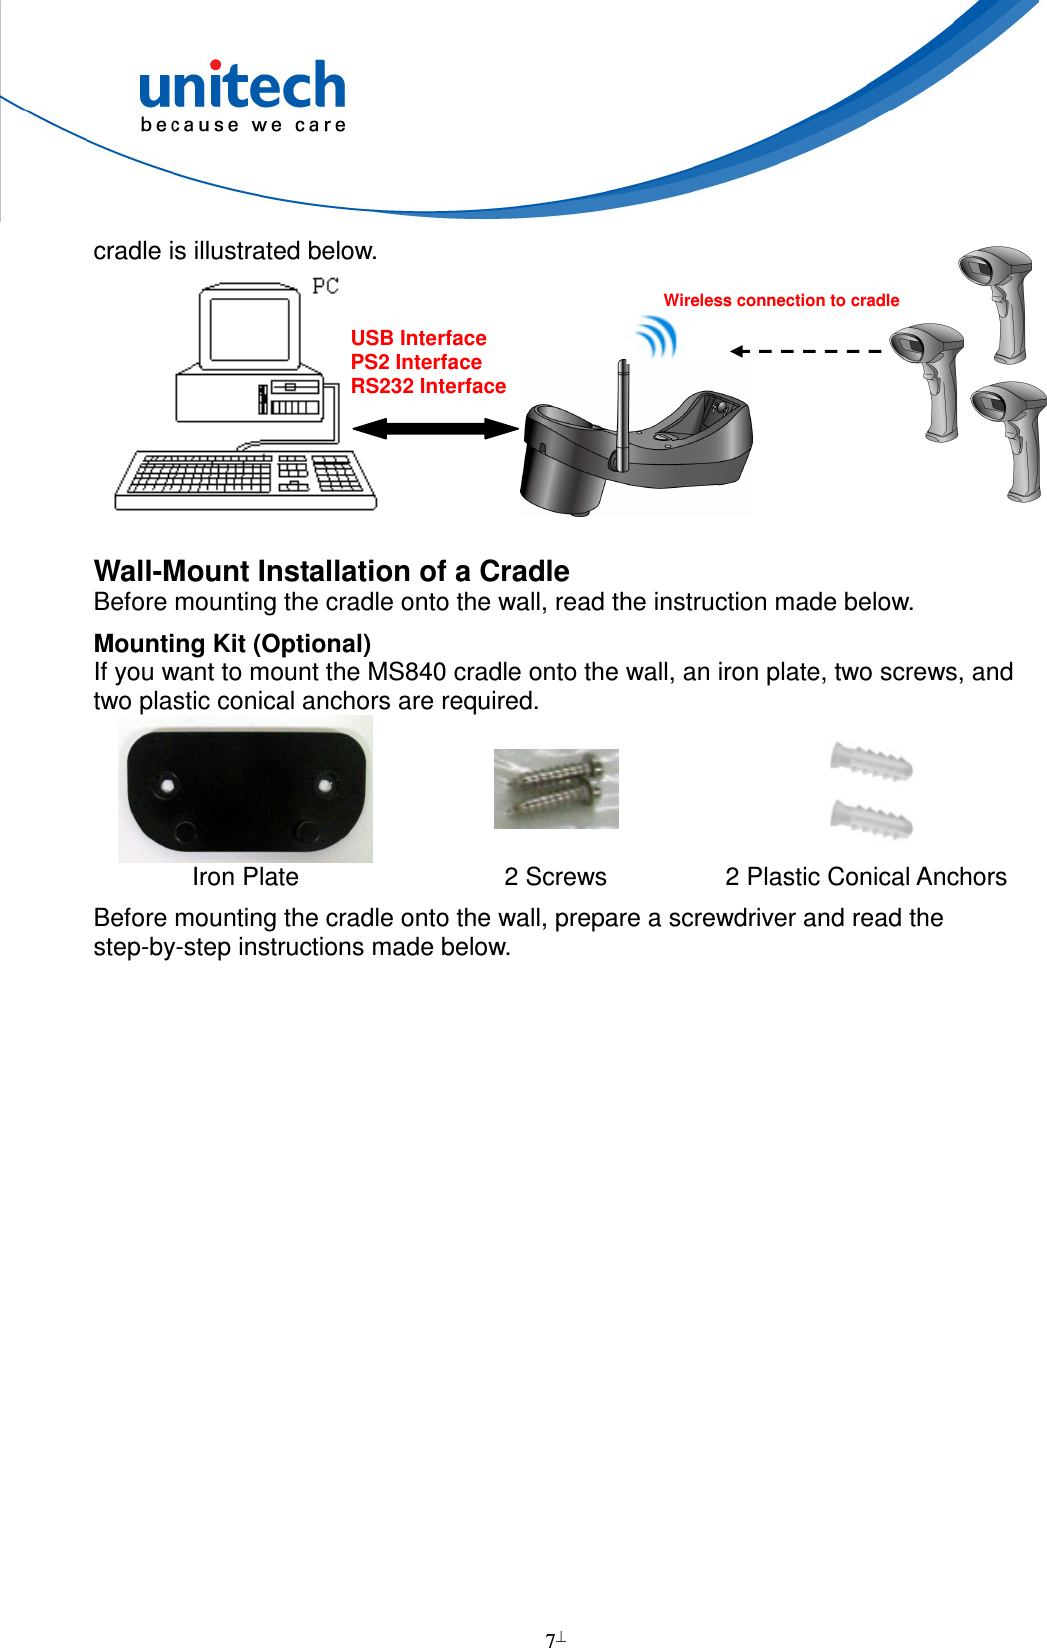  7  cradle is illustrated below.                      Wall-Mount Installation of a Cradle Before mounting the cradle onto the wall, read the instruction made below. Mounting Kit (Optional) If you want to mount the MS840 cradle onto the wall, an iron plate, two screws, and two plastic conical anchors are required.     Iron Plate  2 Screws  2 Plastic Conical Anchors Before mounting the cradle onto the wall, prepare a screwdriver and read the step-by-step instructions made below.USB Interface PS2 Interface RS232 Interface  Wireless connection to cradle    